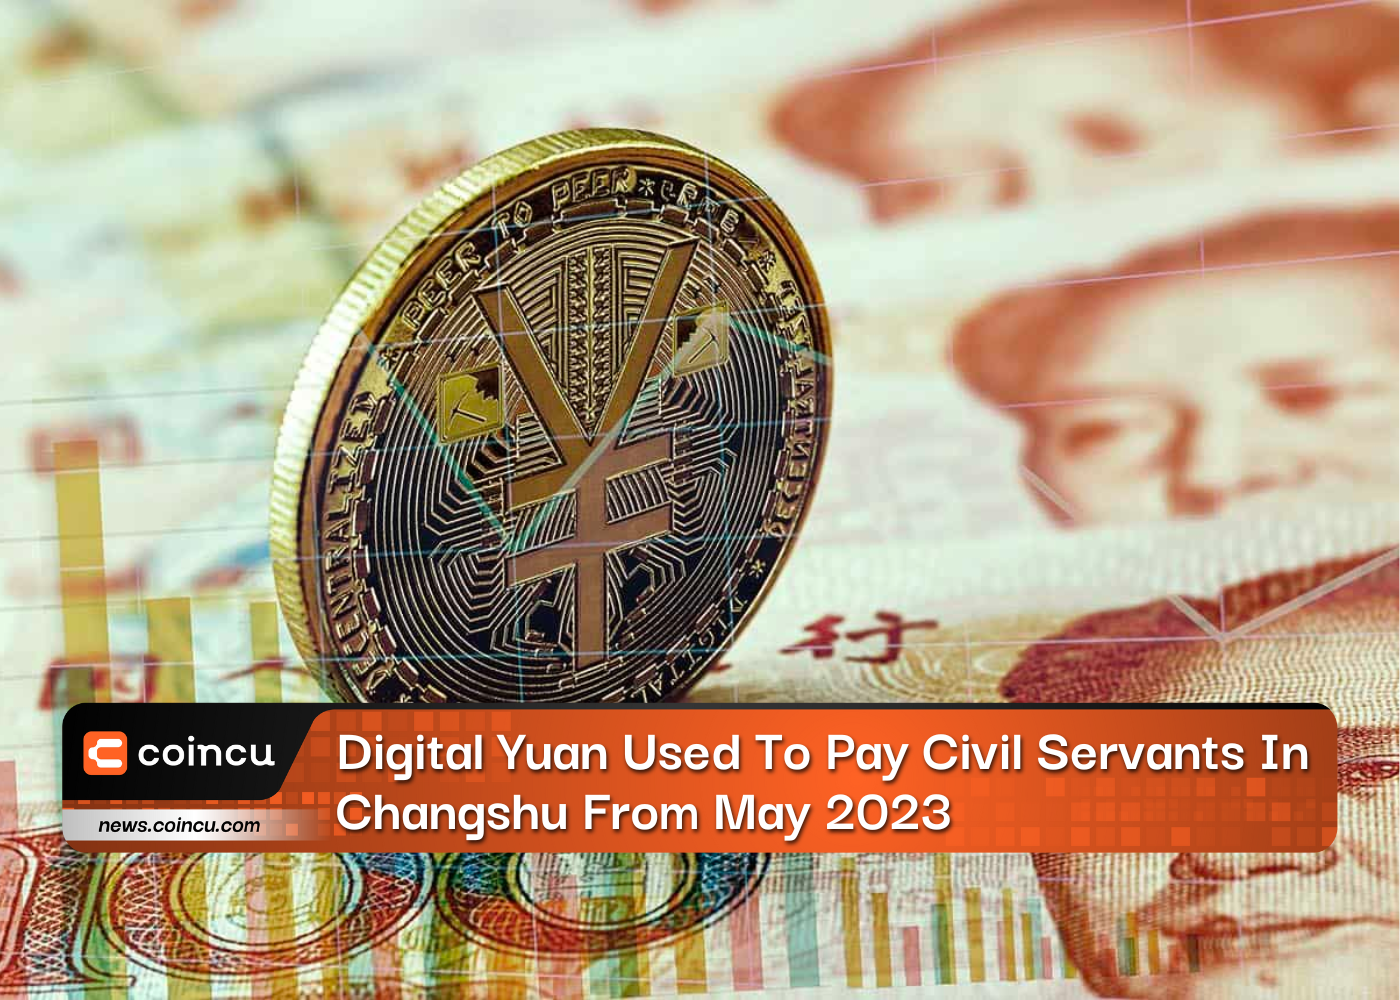 Digital Yuan Used To Pay Civil Servants In Changshu From May 2023